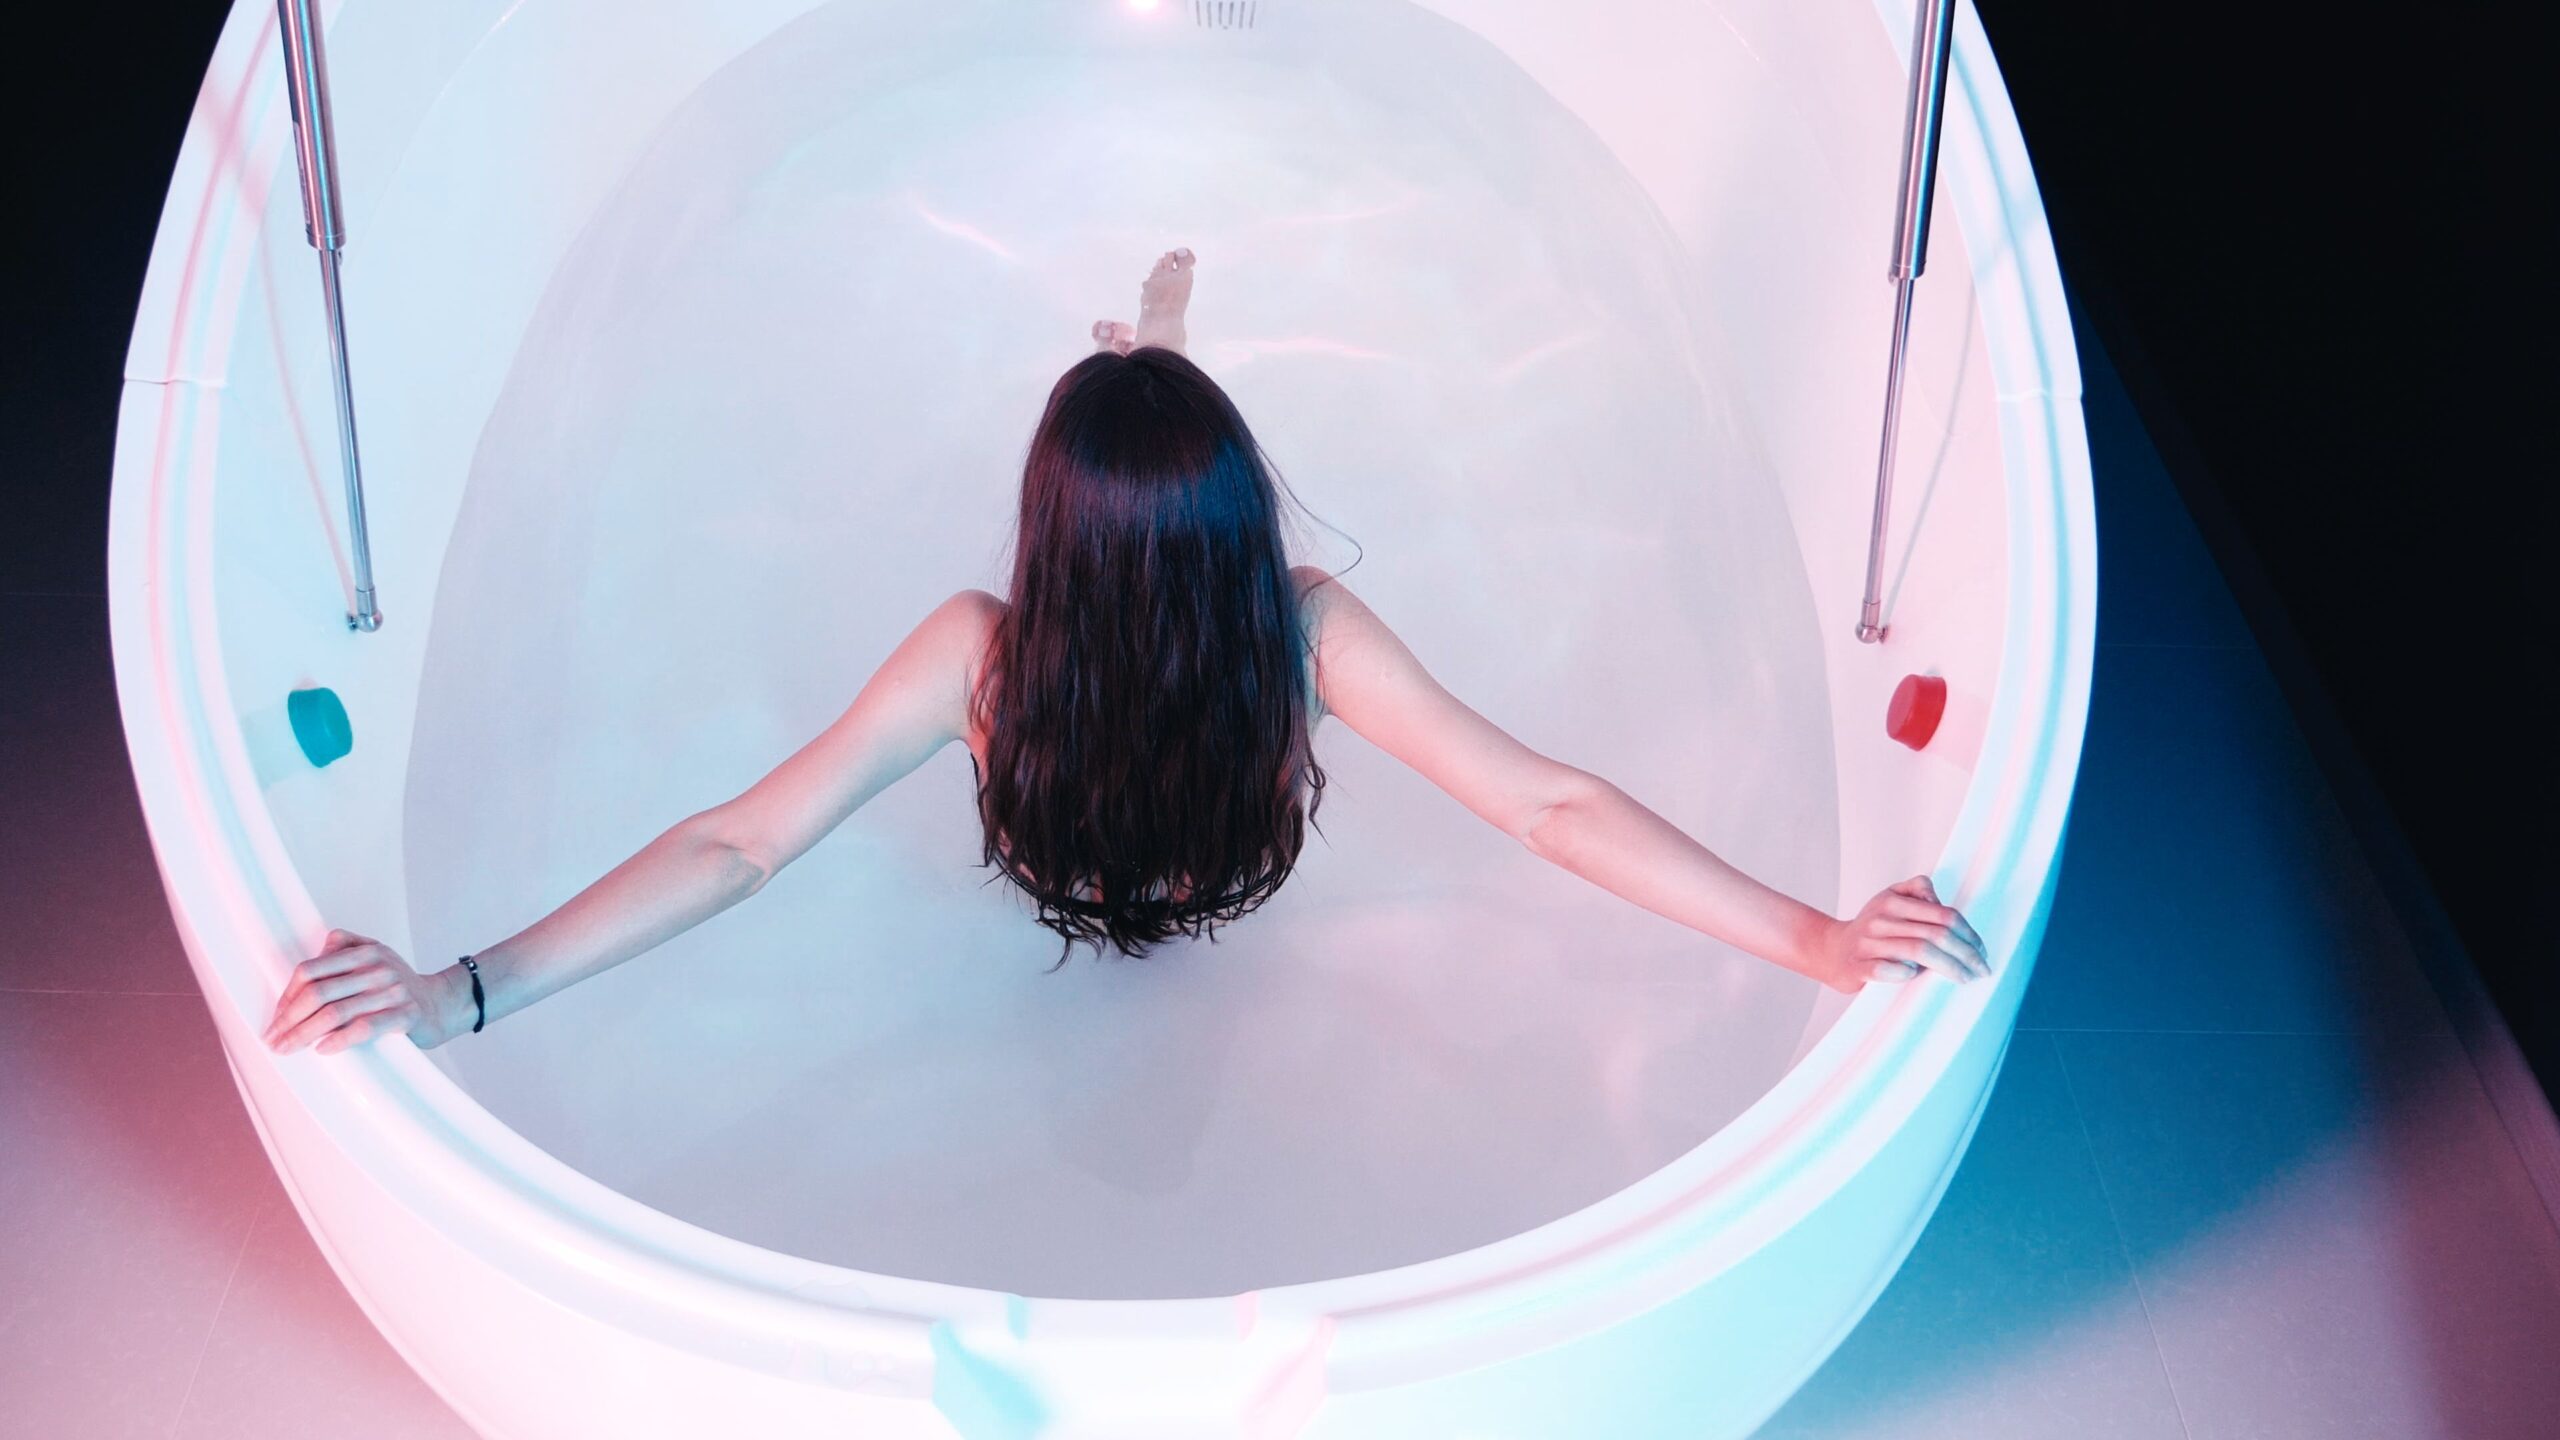 All You Need To Know About Floating Sensory Deprivation Tank